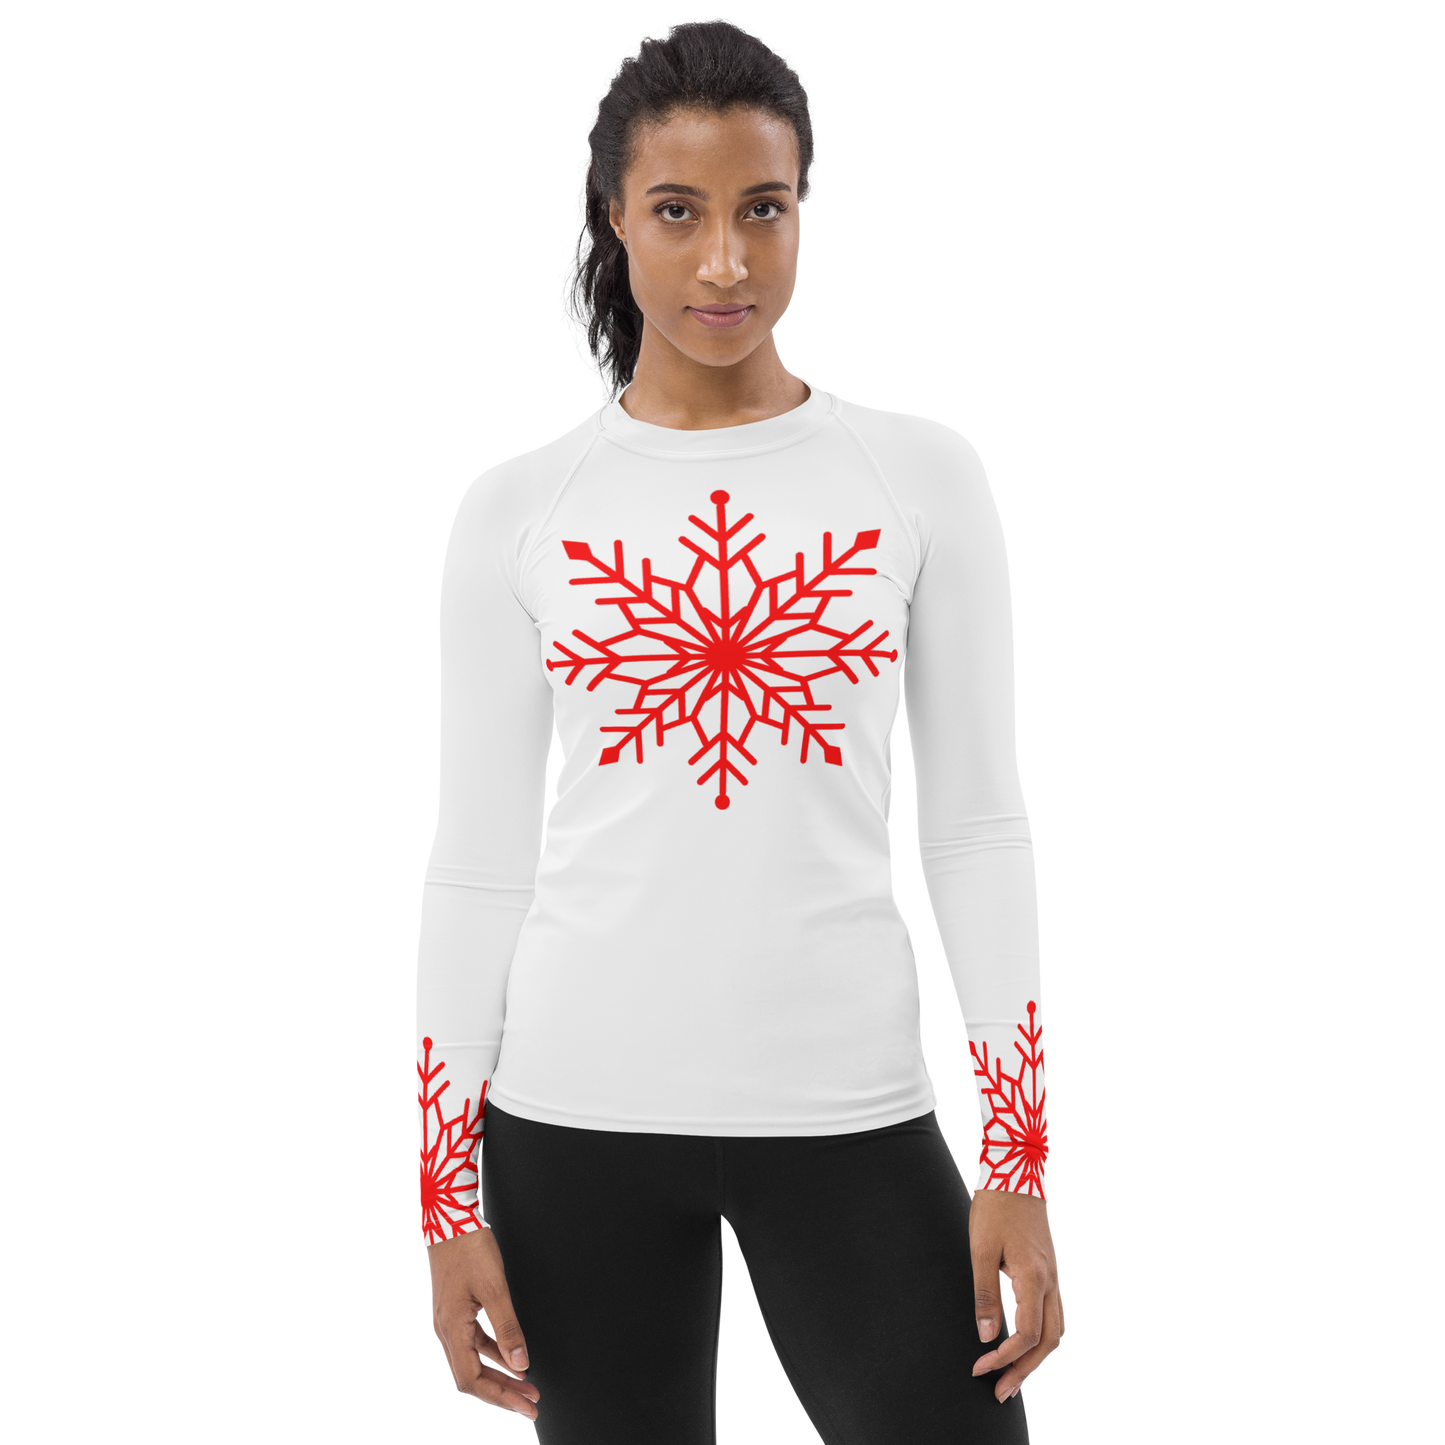 Winter Snowflake Top, Bright Red Snowflake on White Women's Rash Guard, Holiday Top